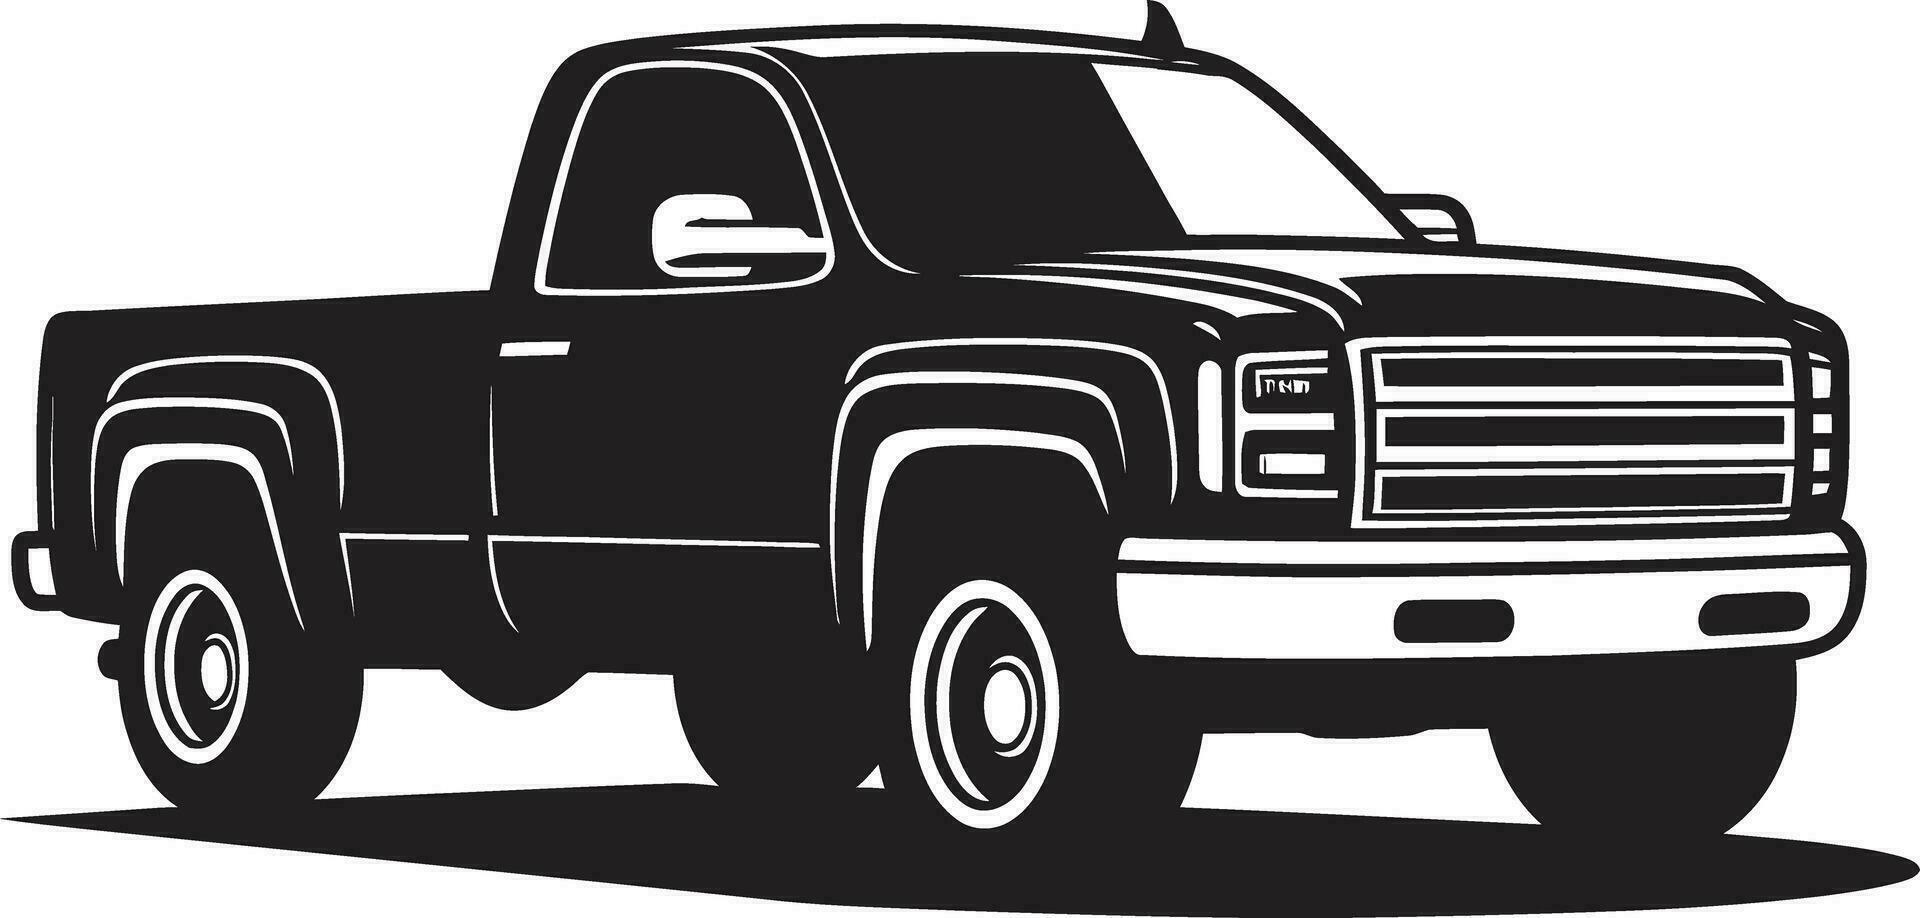 Pickup Truck Vector Perfect for Automotive Projects Modern Pickup Truck in Detailed Vector Art